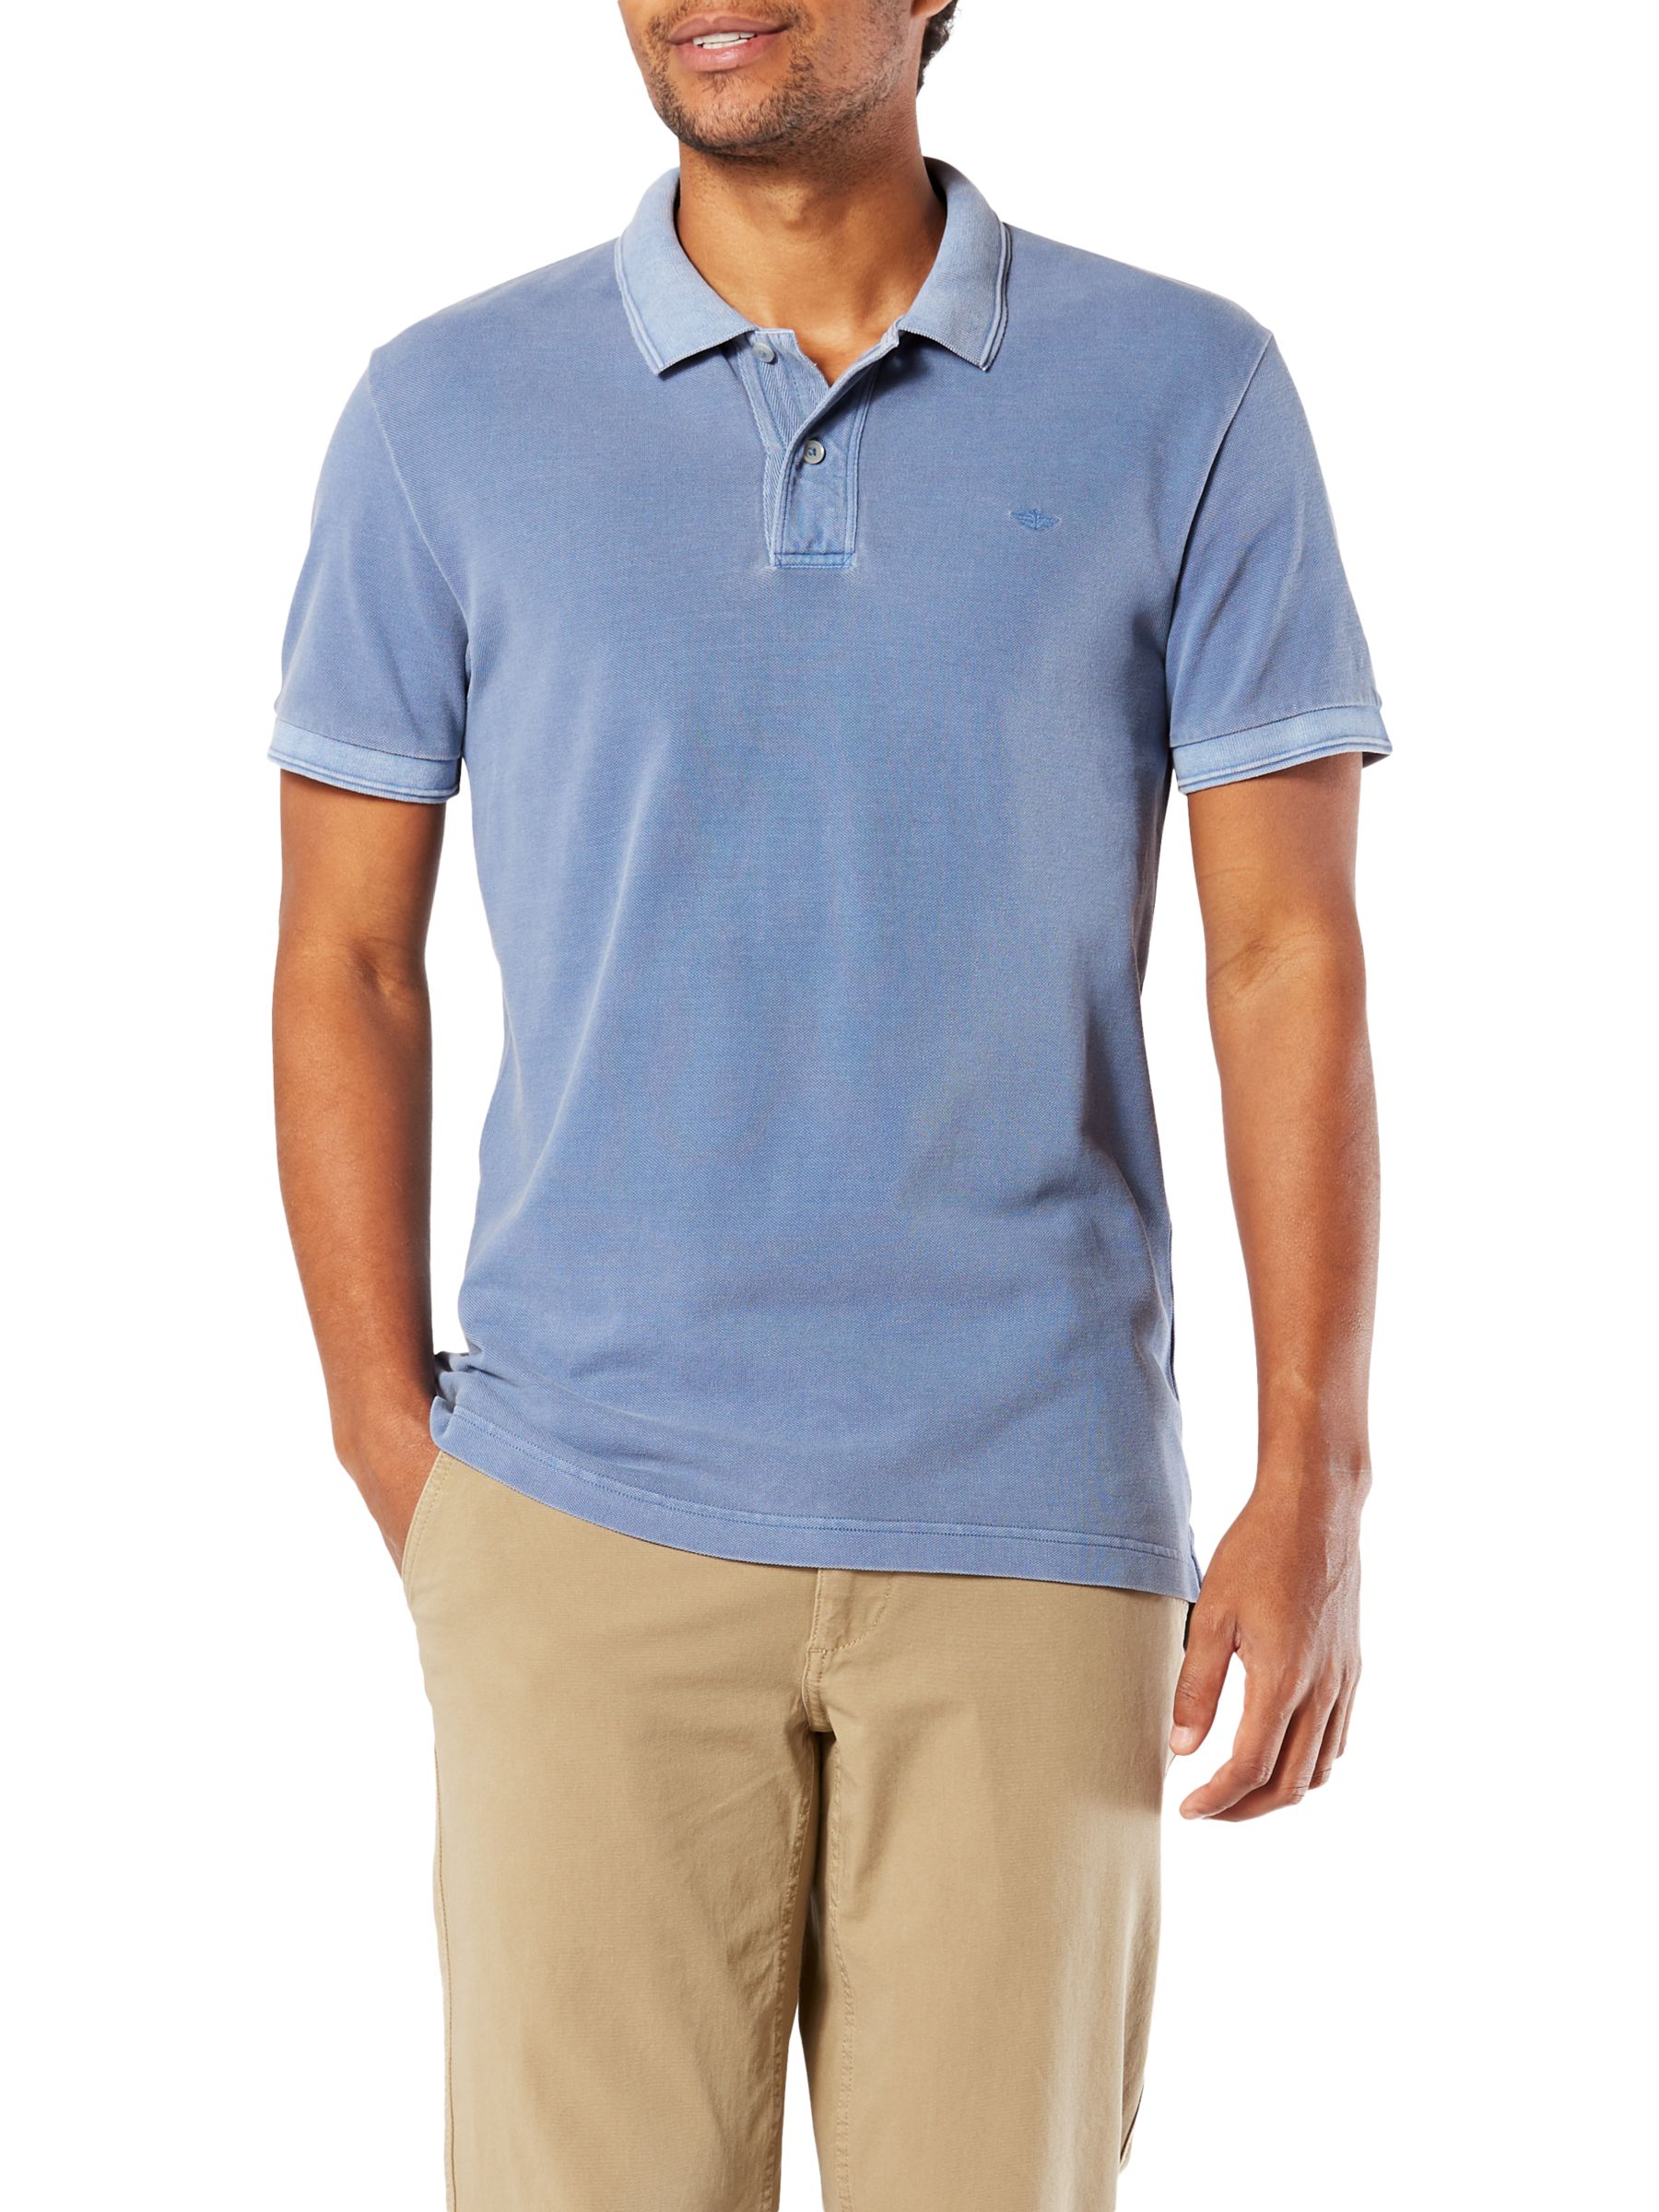 Dockers Garment Dyed Fitted Short Sleeve Polo Shirt at John Lewis ...